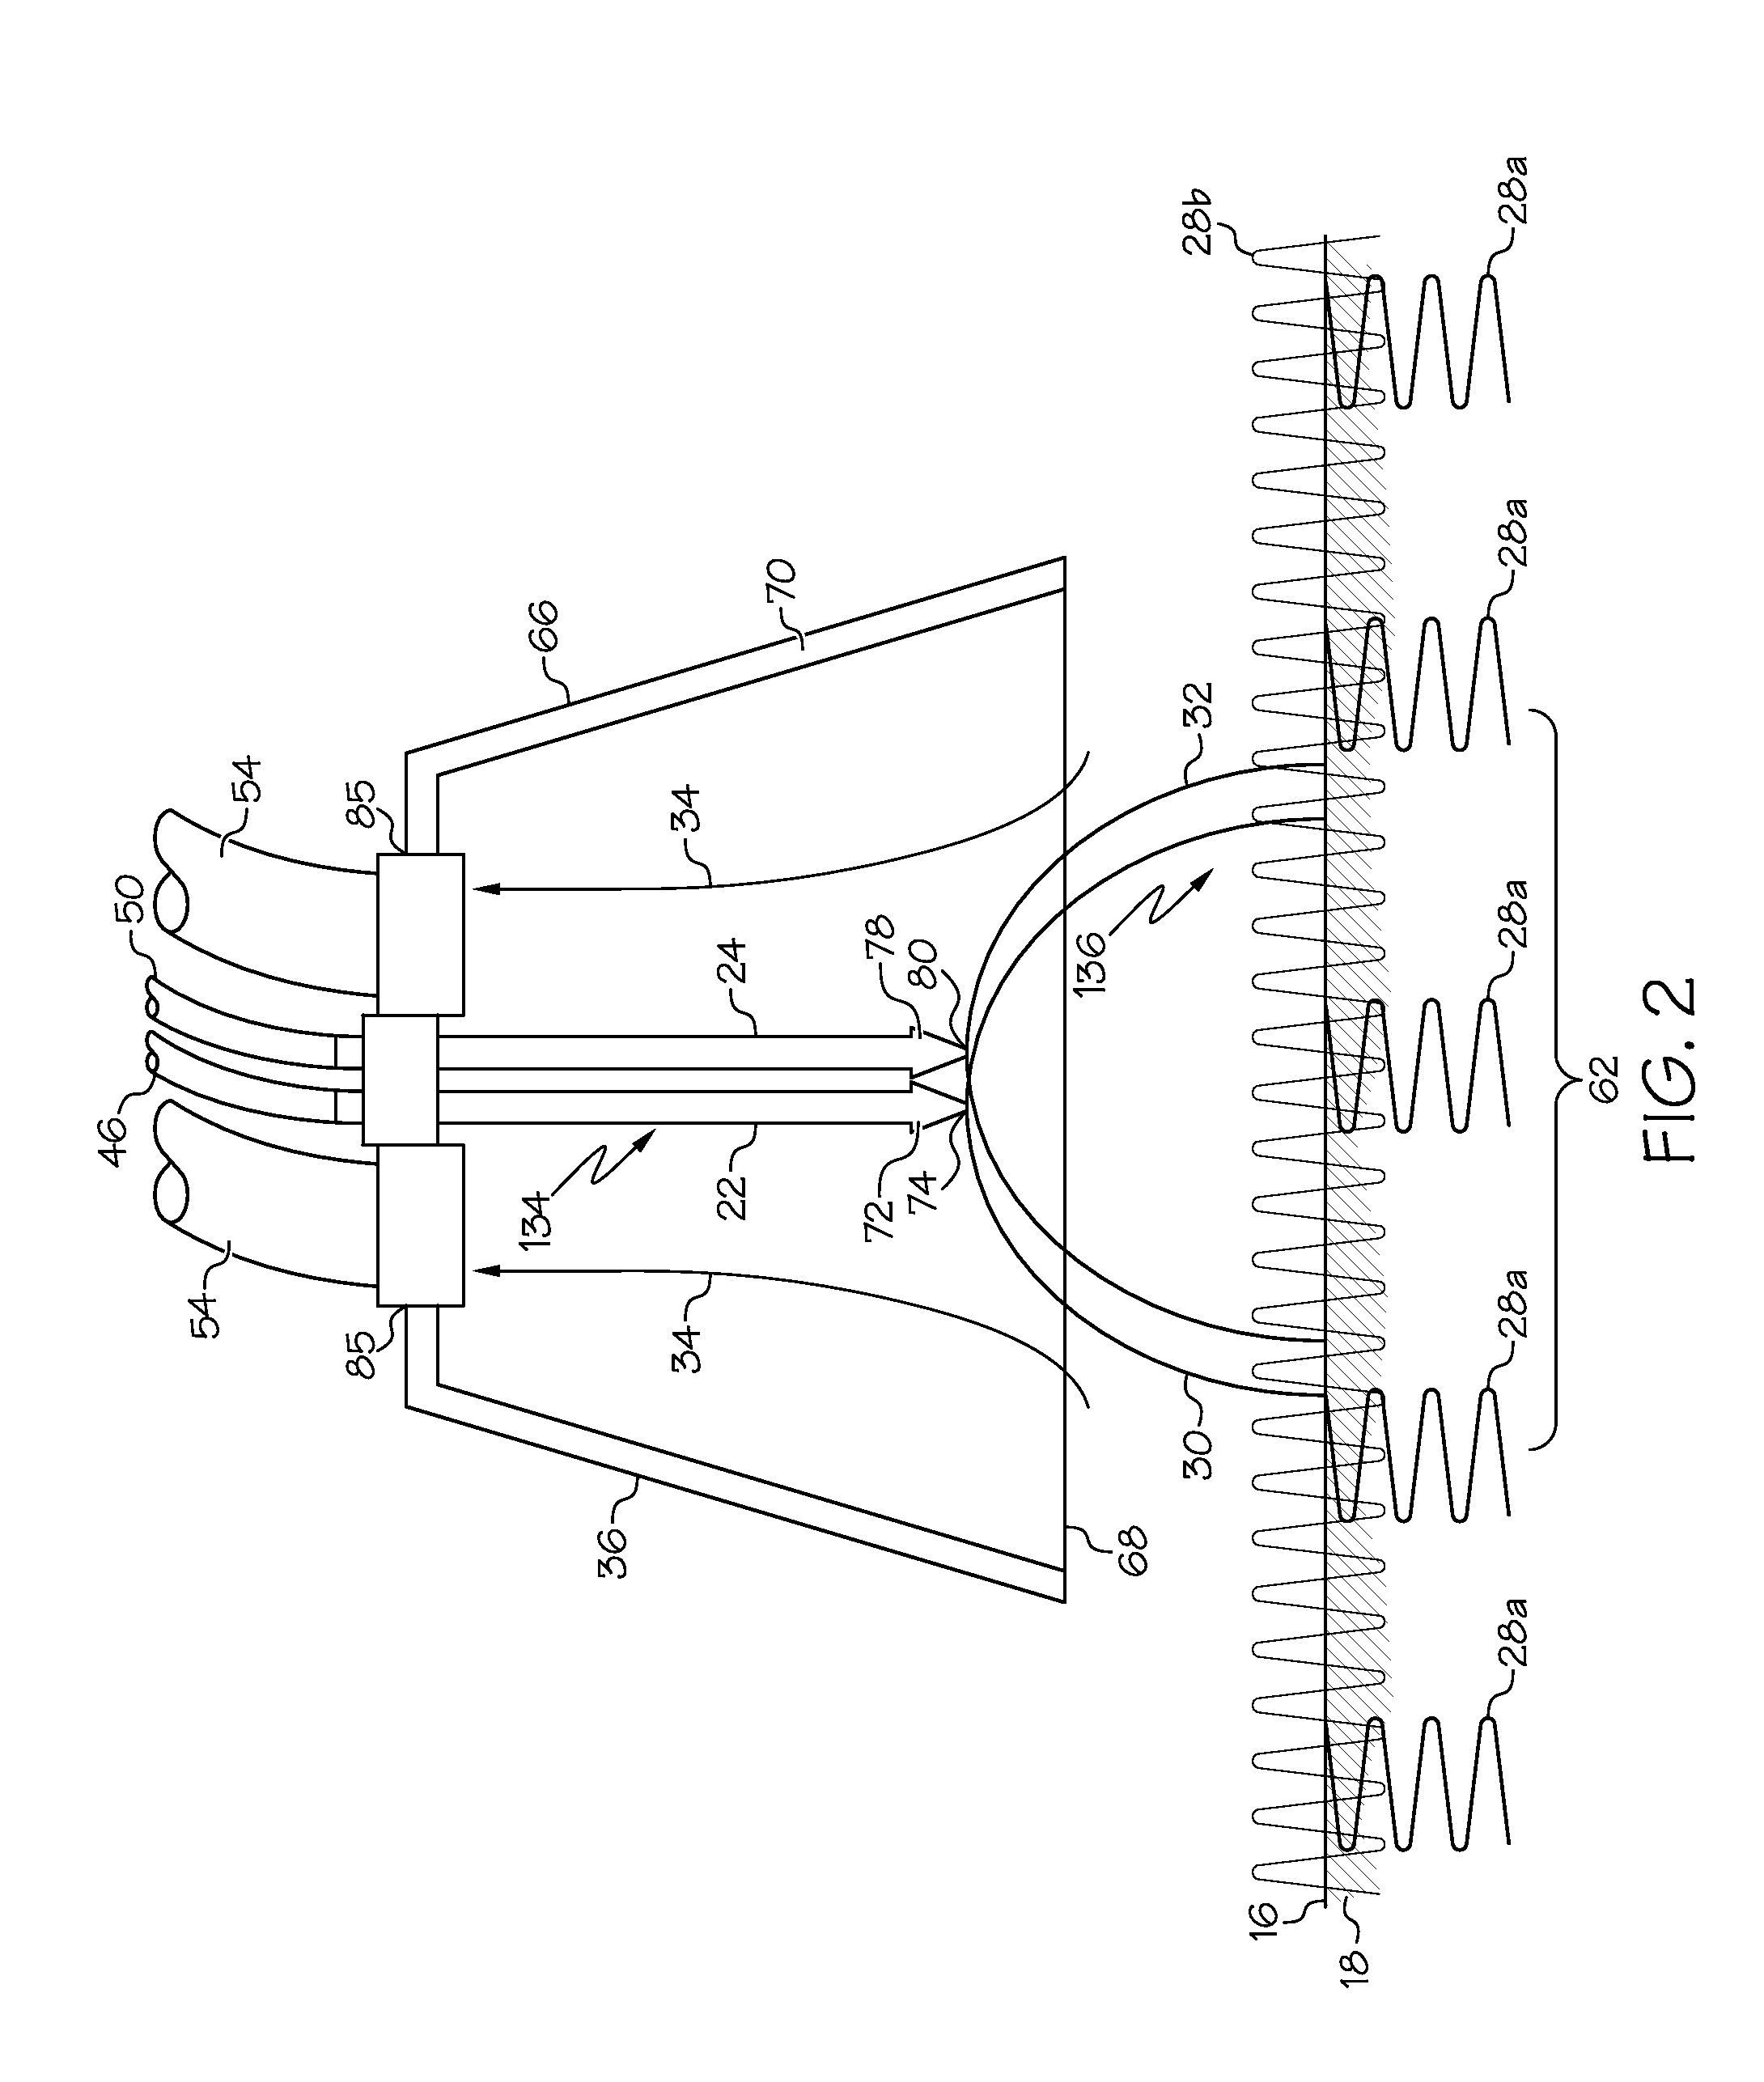 System and Method for Surface Cleaning